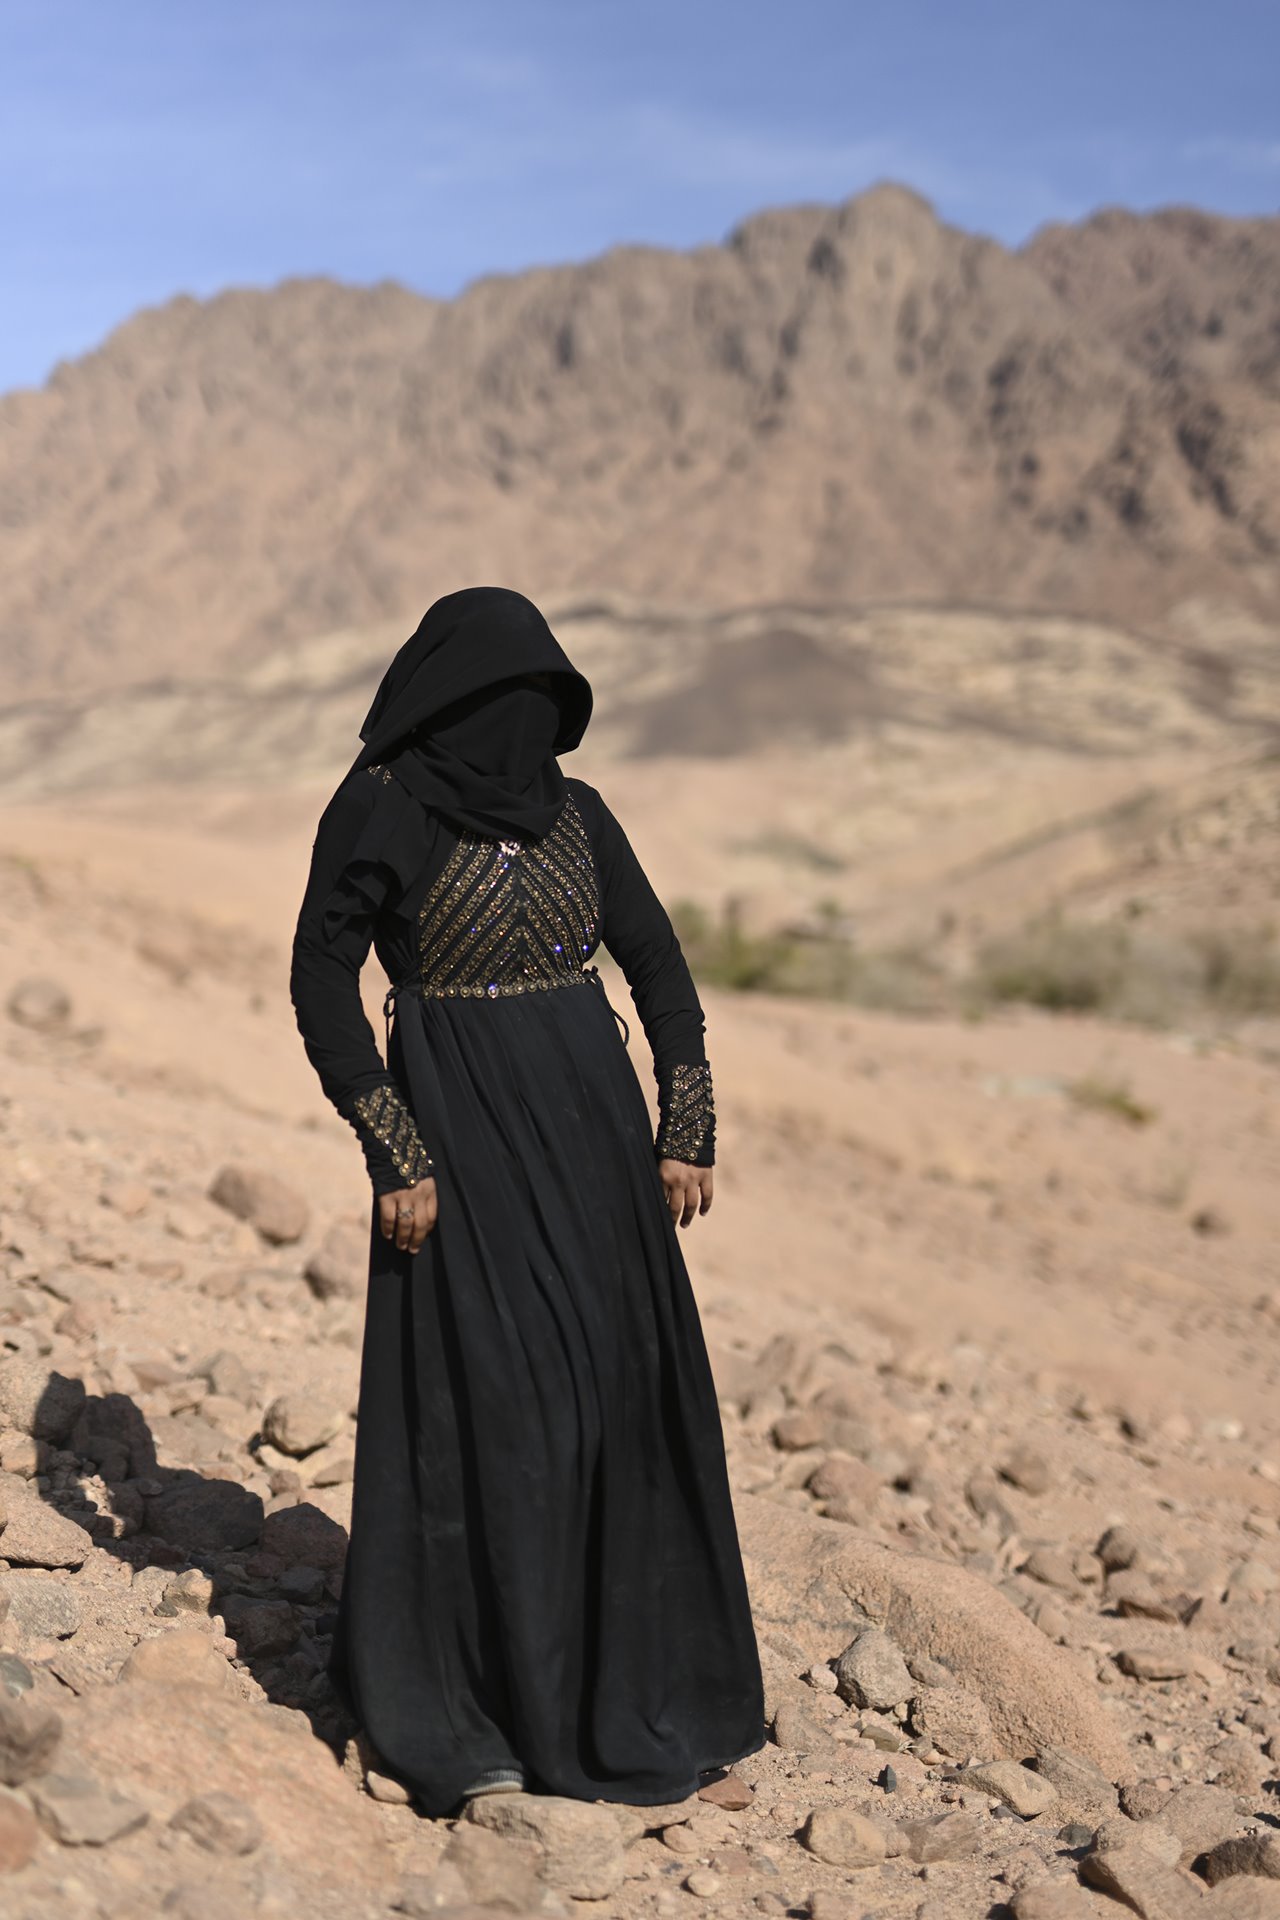 Hoda (23), who is from the city of St. Catherine, stands on the edge of a hill overlooking the Gharba Valley.&nbsp;